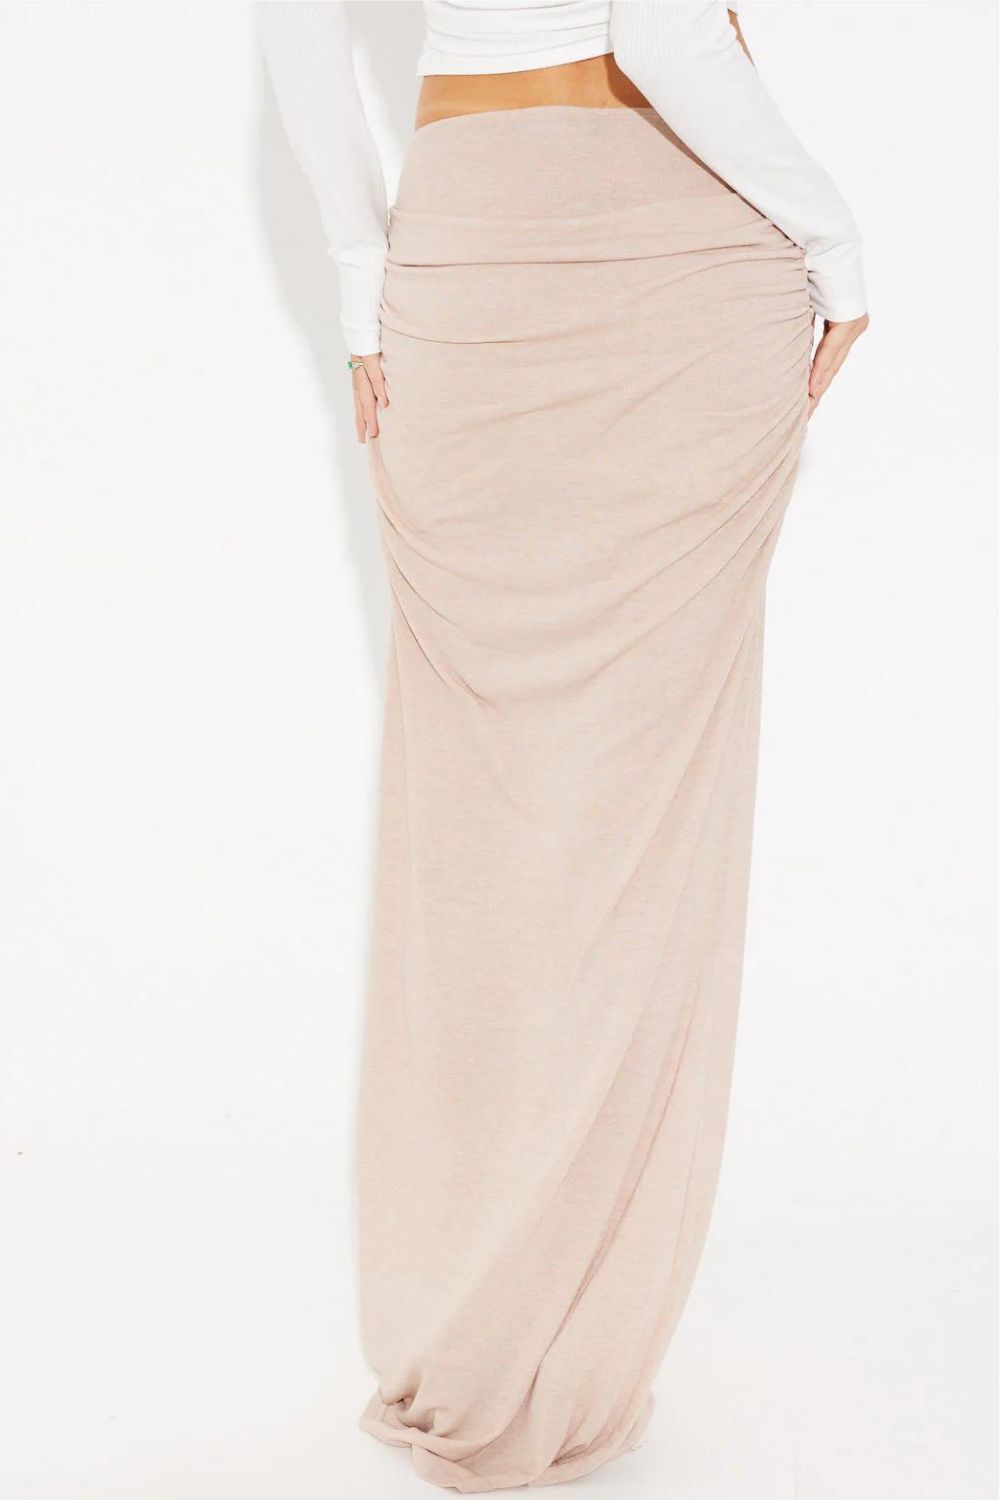 Lioness | Almost Famous Maxi Skirt | Taupe